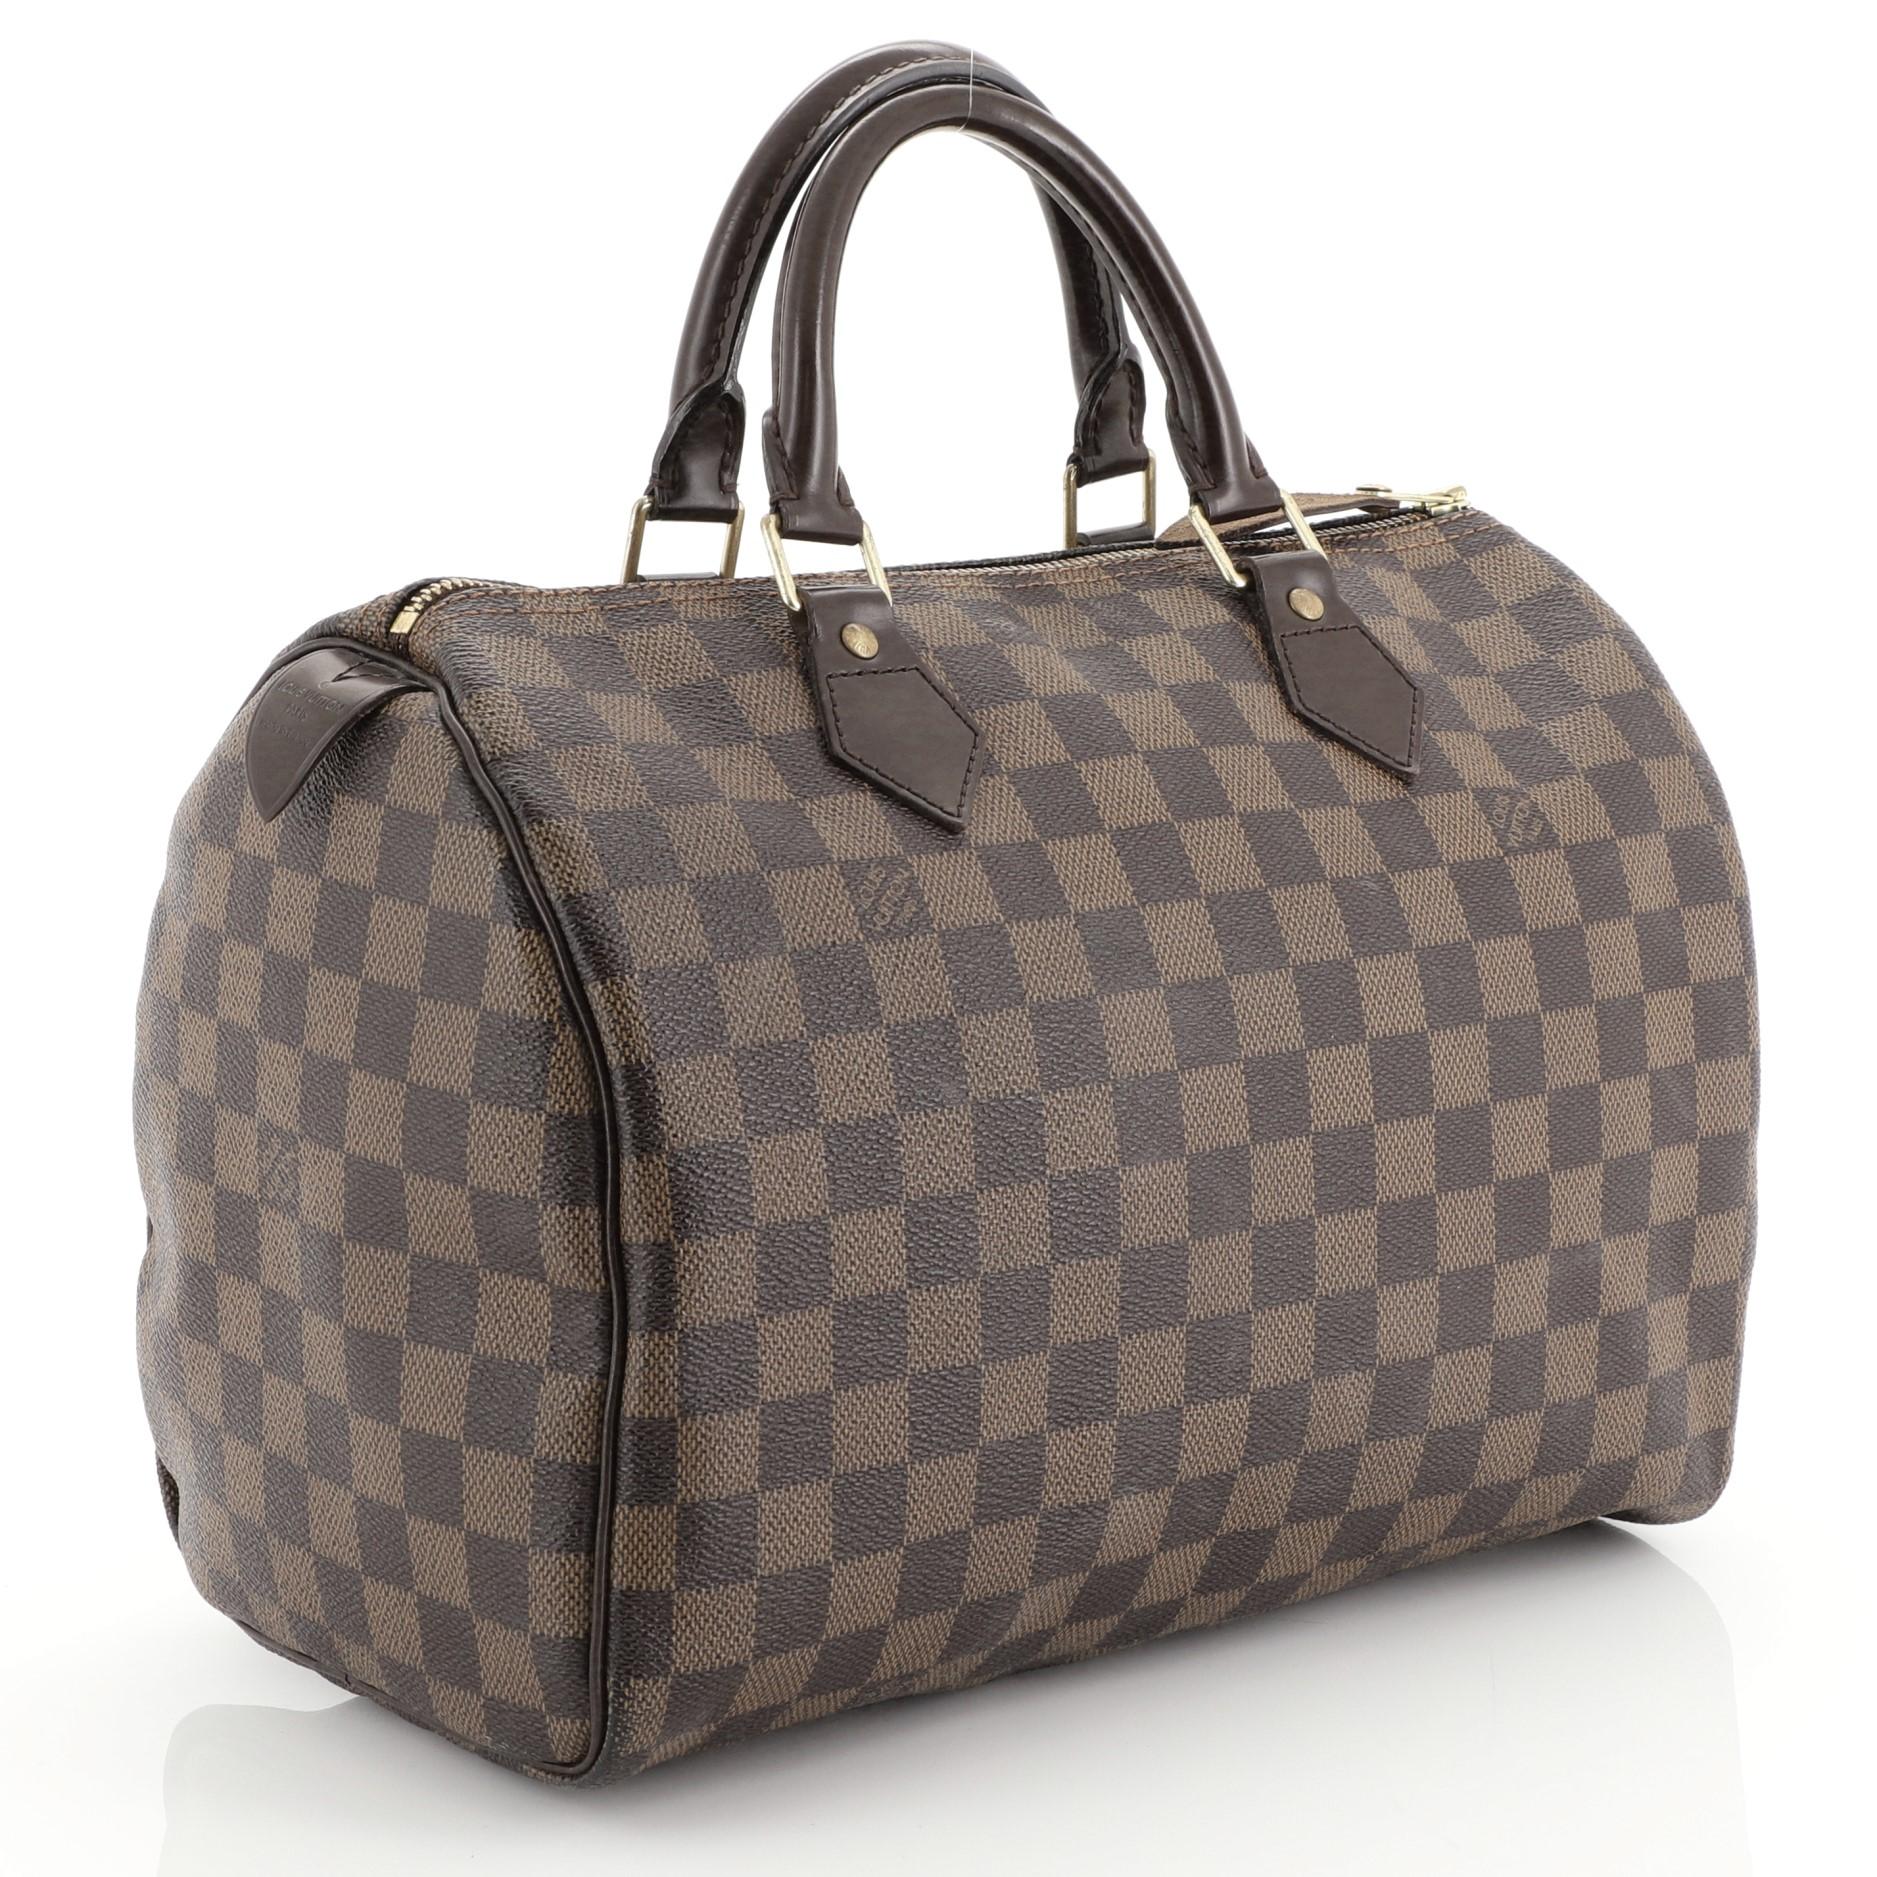 This Louis Vuitton Speedy Handbag Damier 30, crafted in damier ebene coated canvas, features dual rolled handles, leather trim, and gold-tone hardware. Its zip closure opens to a red fabric interior with slip pocket. Authenticity code reads: SP1087.